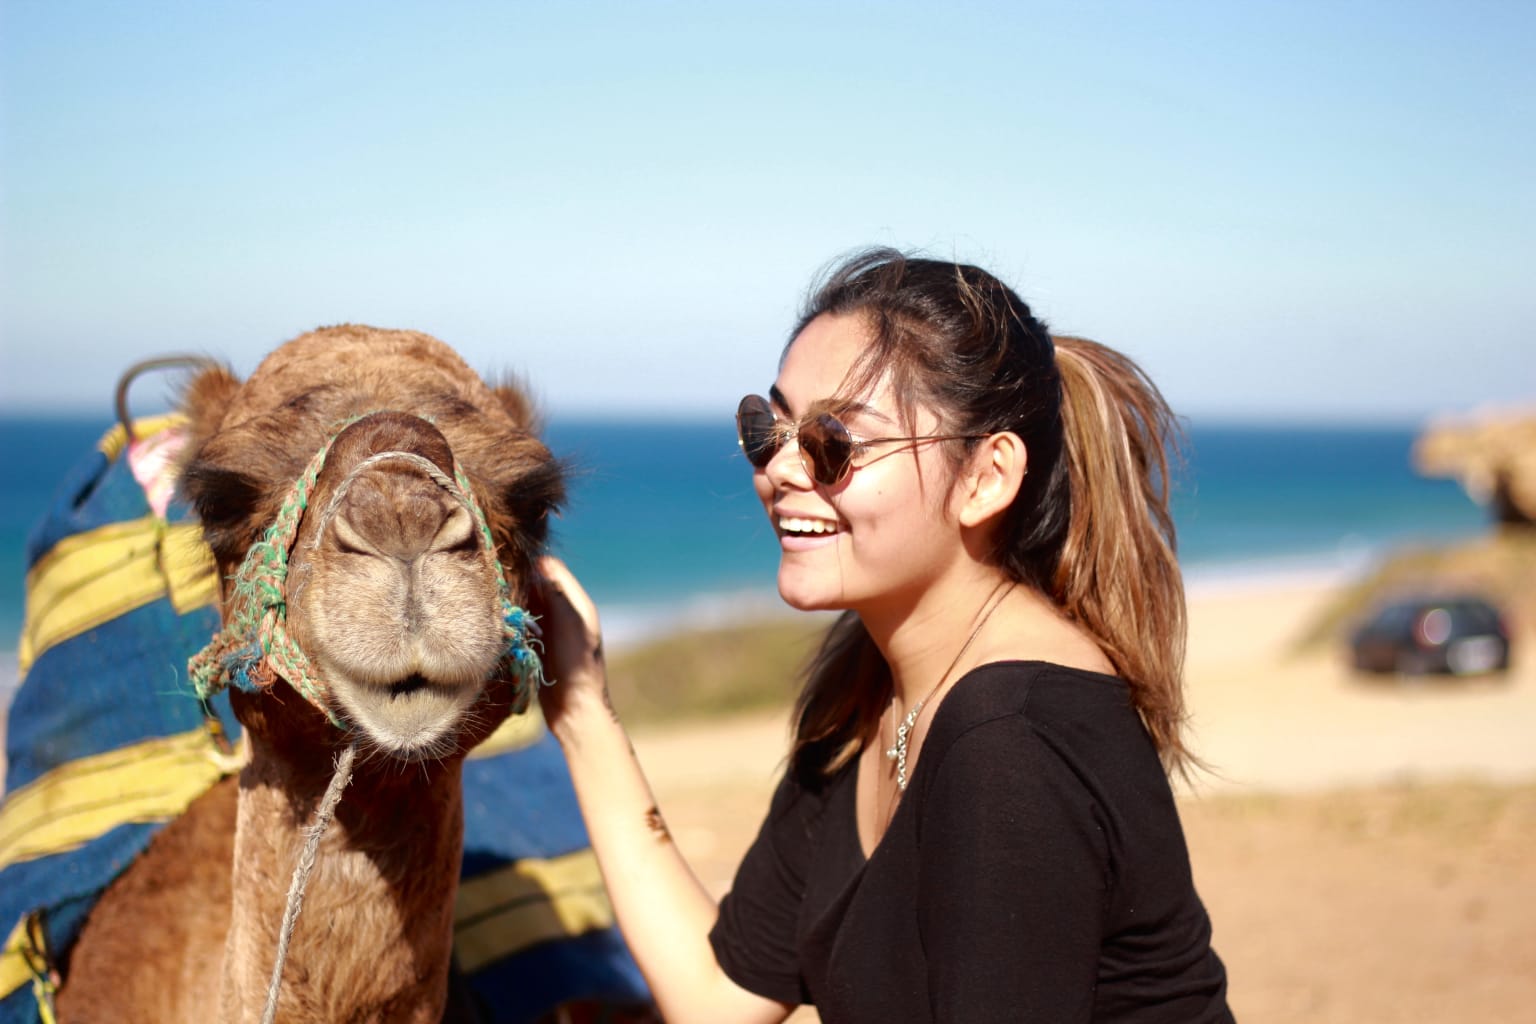 Girl with camel.